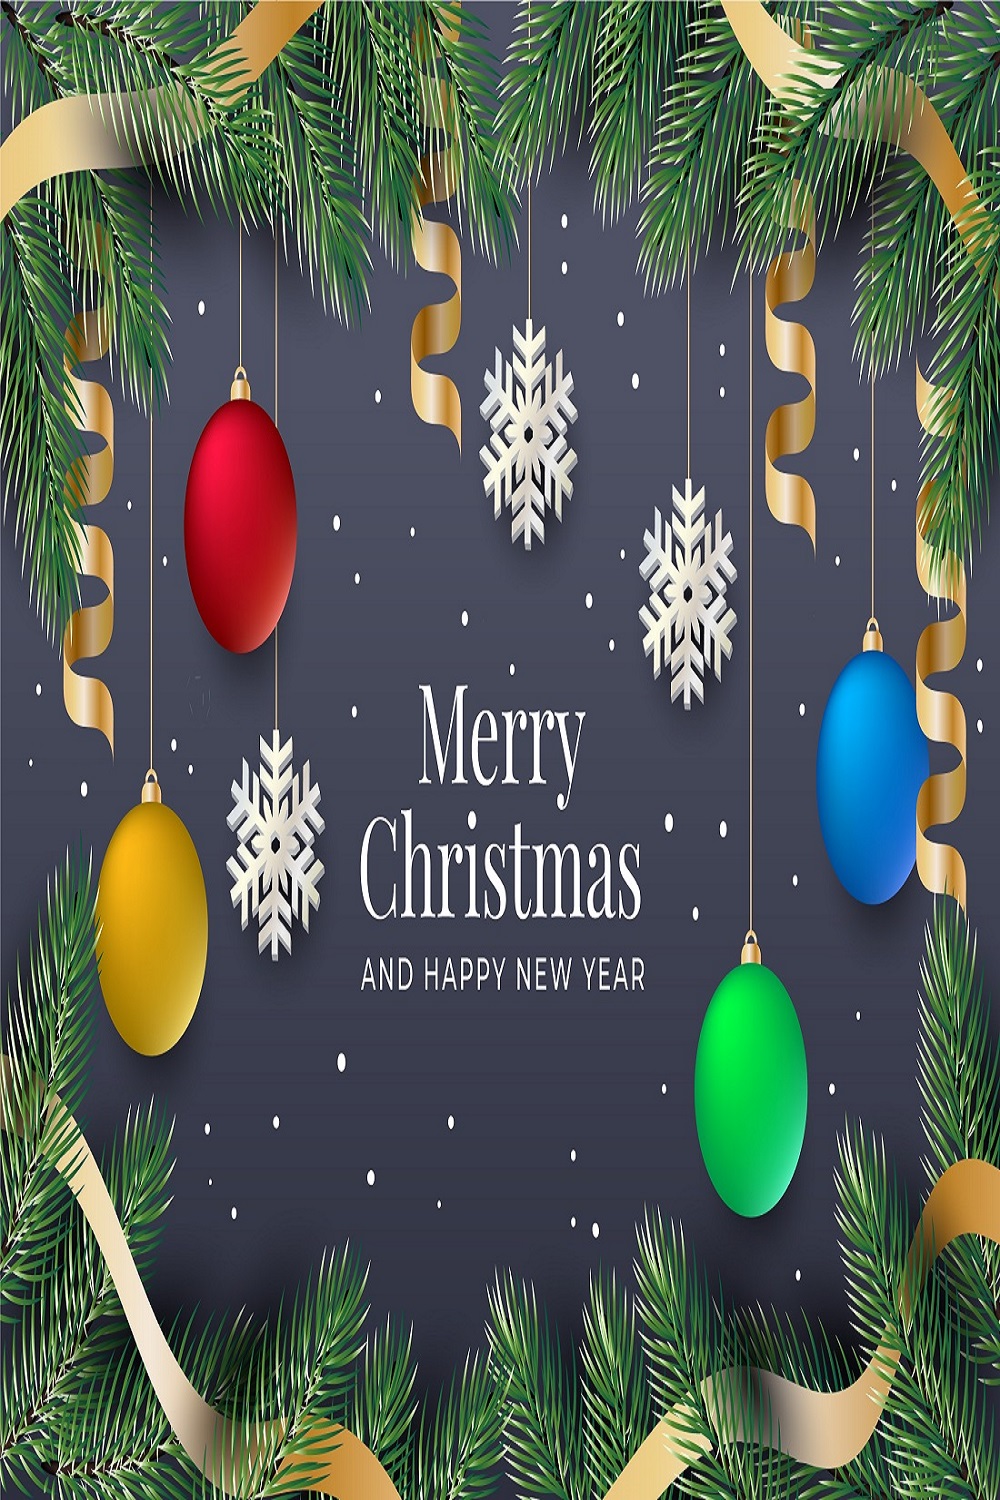 Merry Christmas background pinterest preview image.